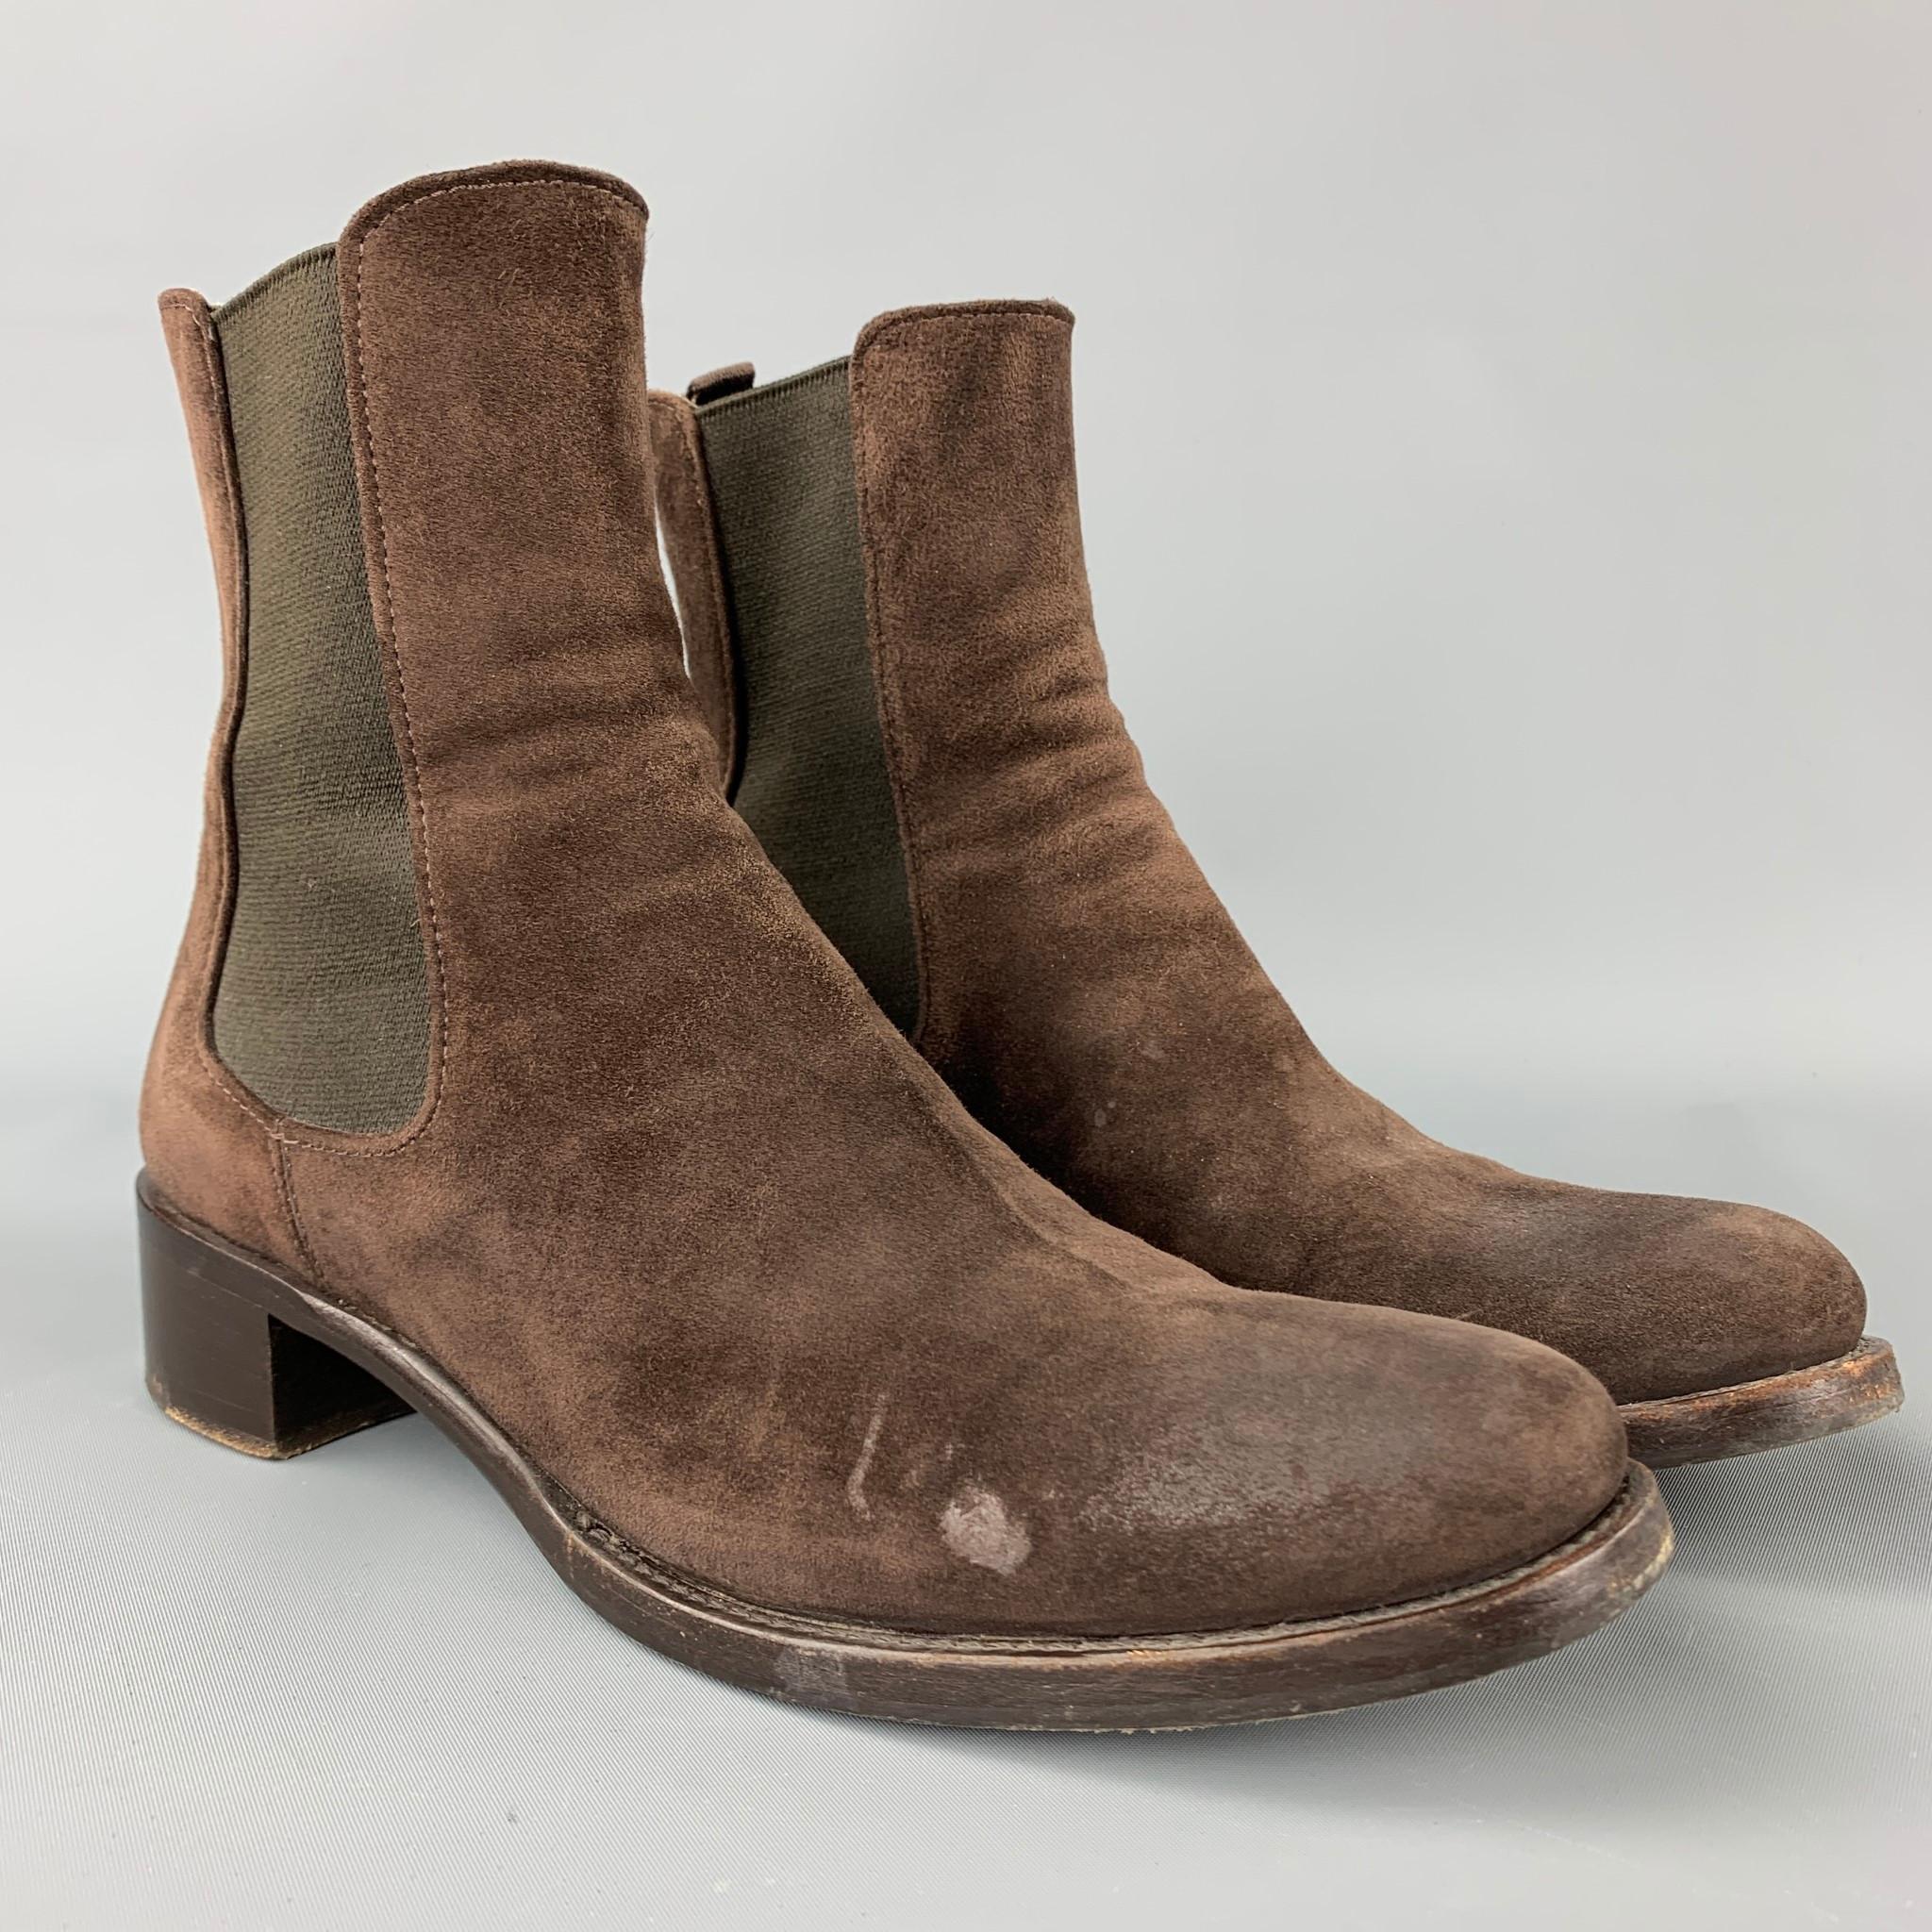 PRADA boots comes in a brown suede featuring a chelsea style, slip on, and a chunky heel. Moderate wear. Made in Italy.

Good Pre-Owned Condition.
Marked: EU 36.5
Original Retail Price: $950.00

Measurements:

Length: 10.5 in.
Width: 3.5 in.
Height: